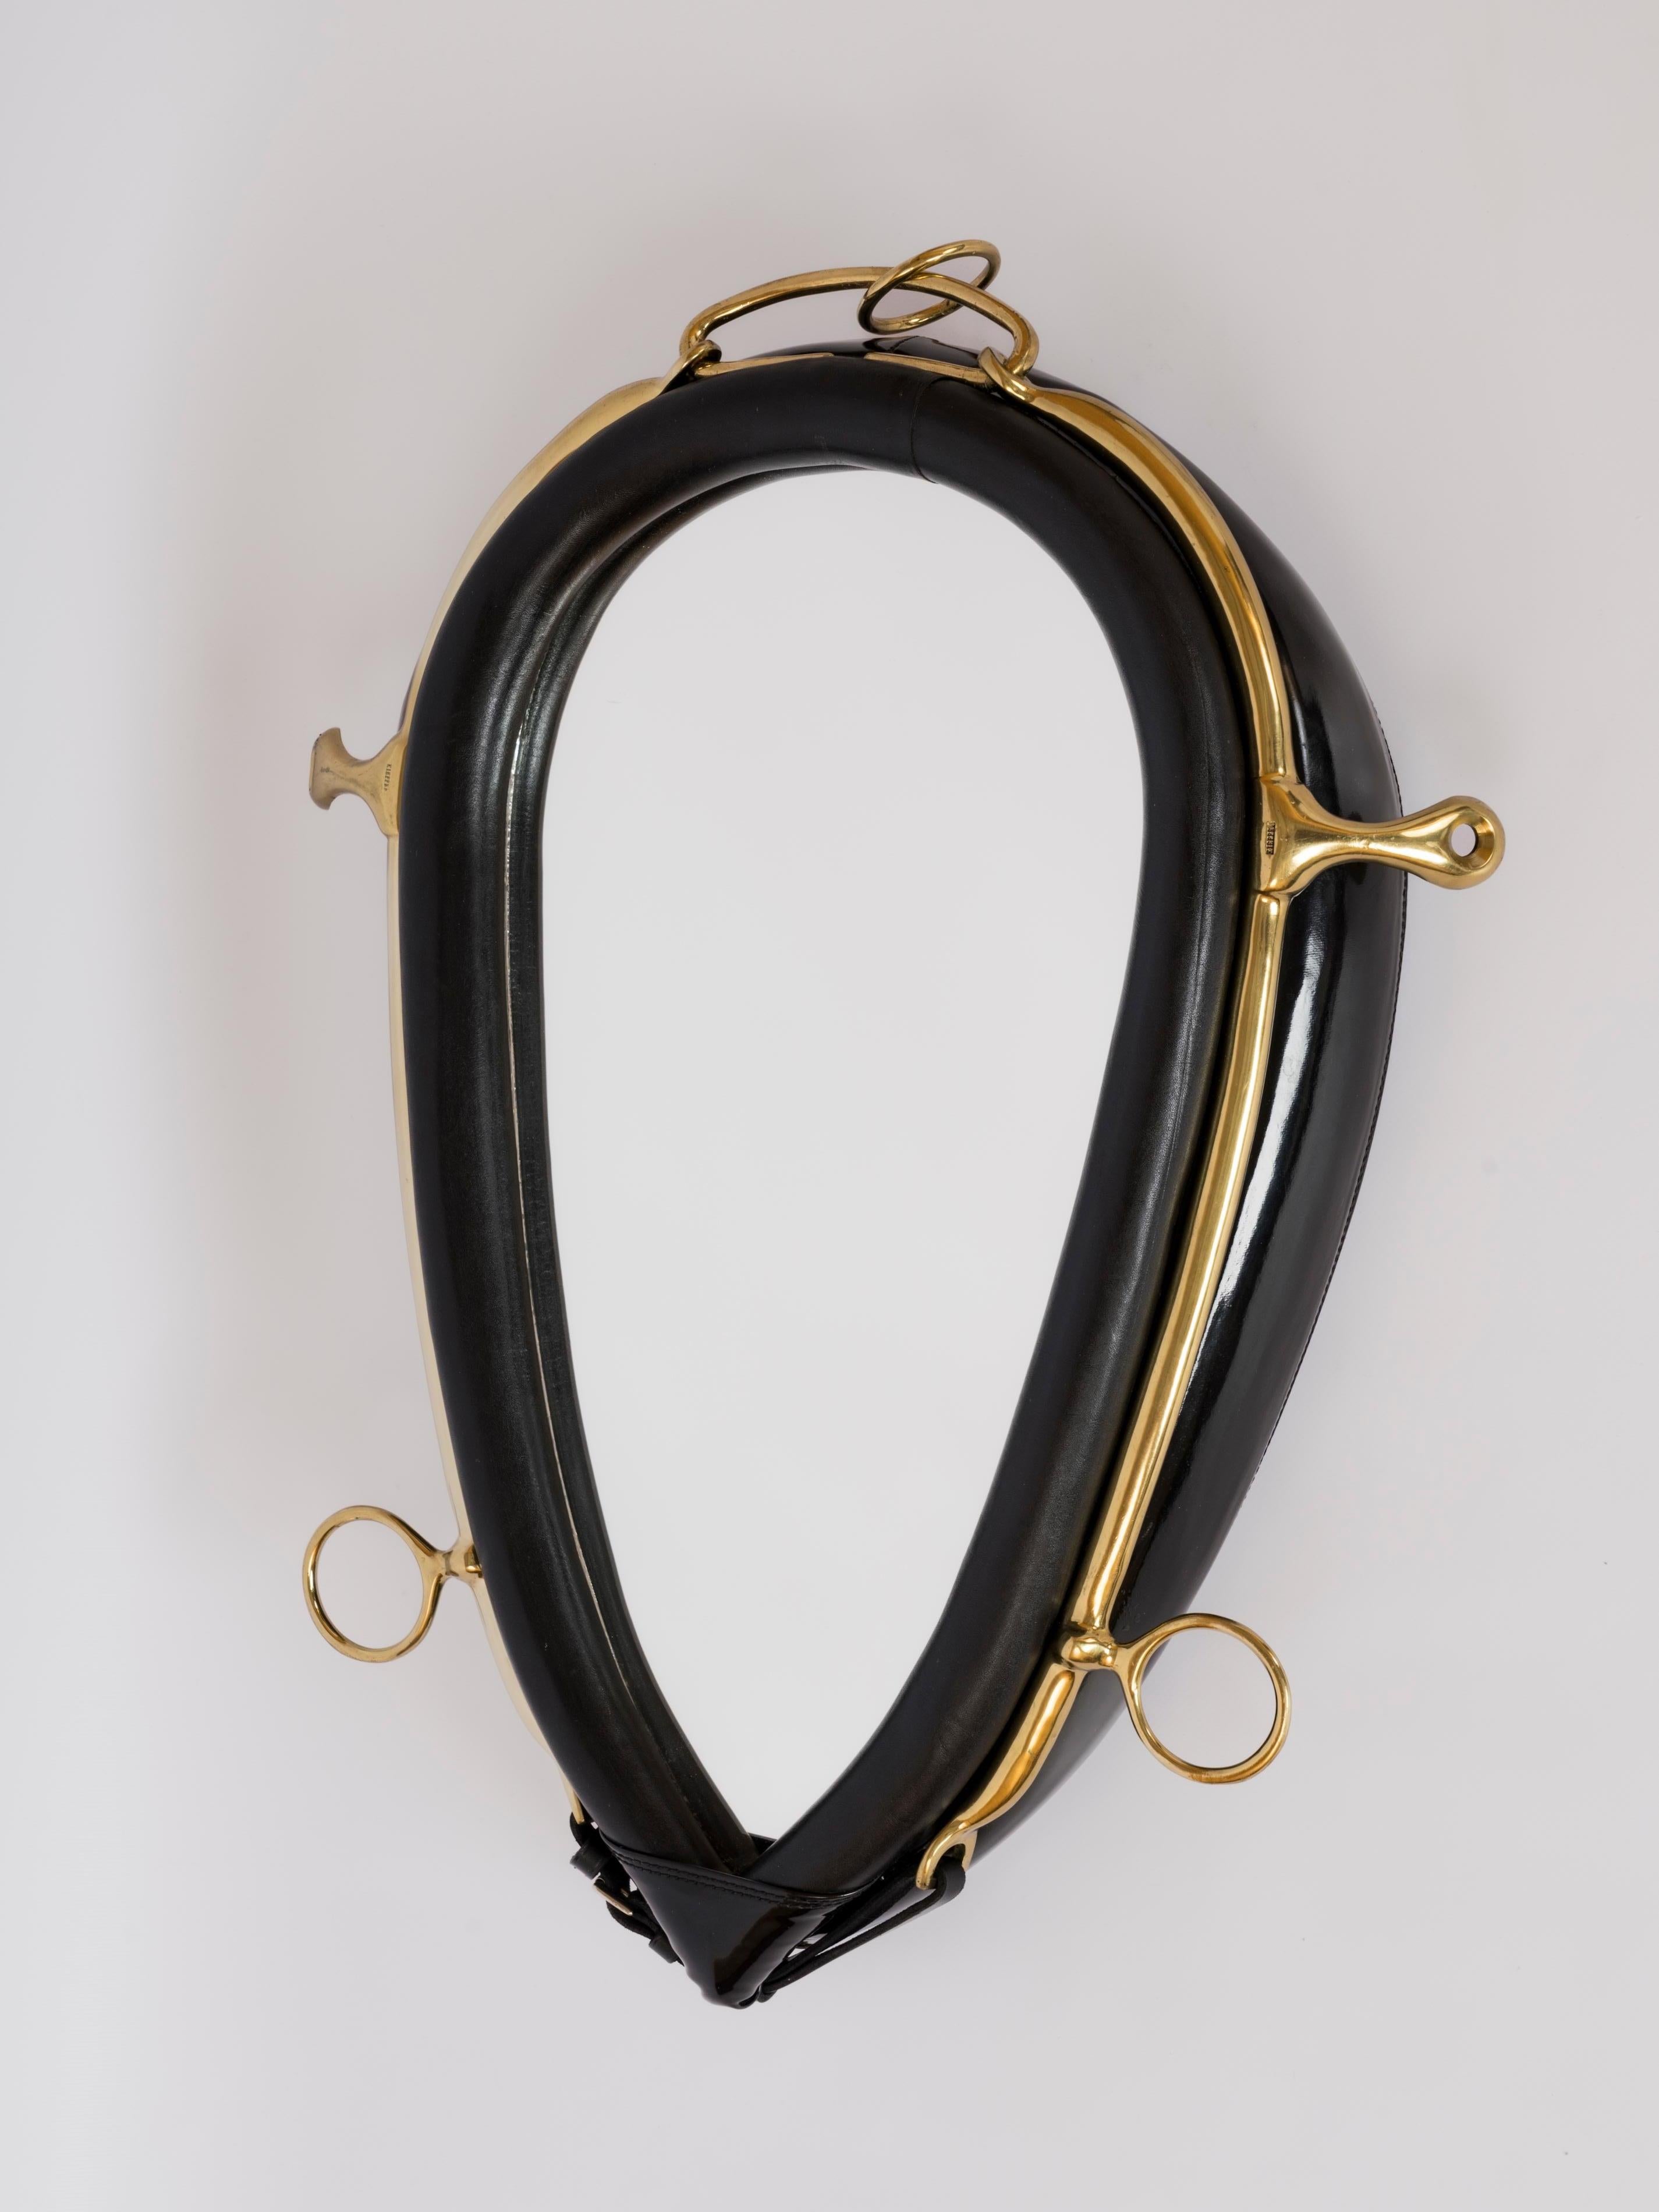 Padded Black Faux Leather & Brass Equestrian Mirror by Kieffer - France 1970's For Sale 1